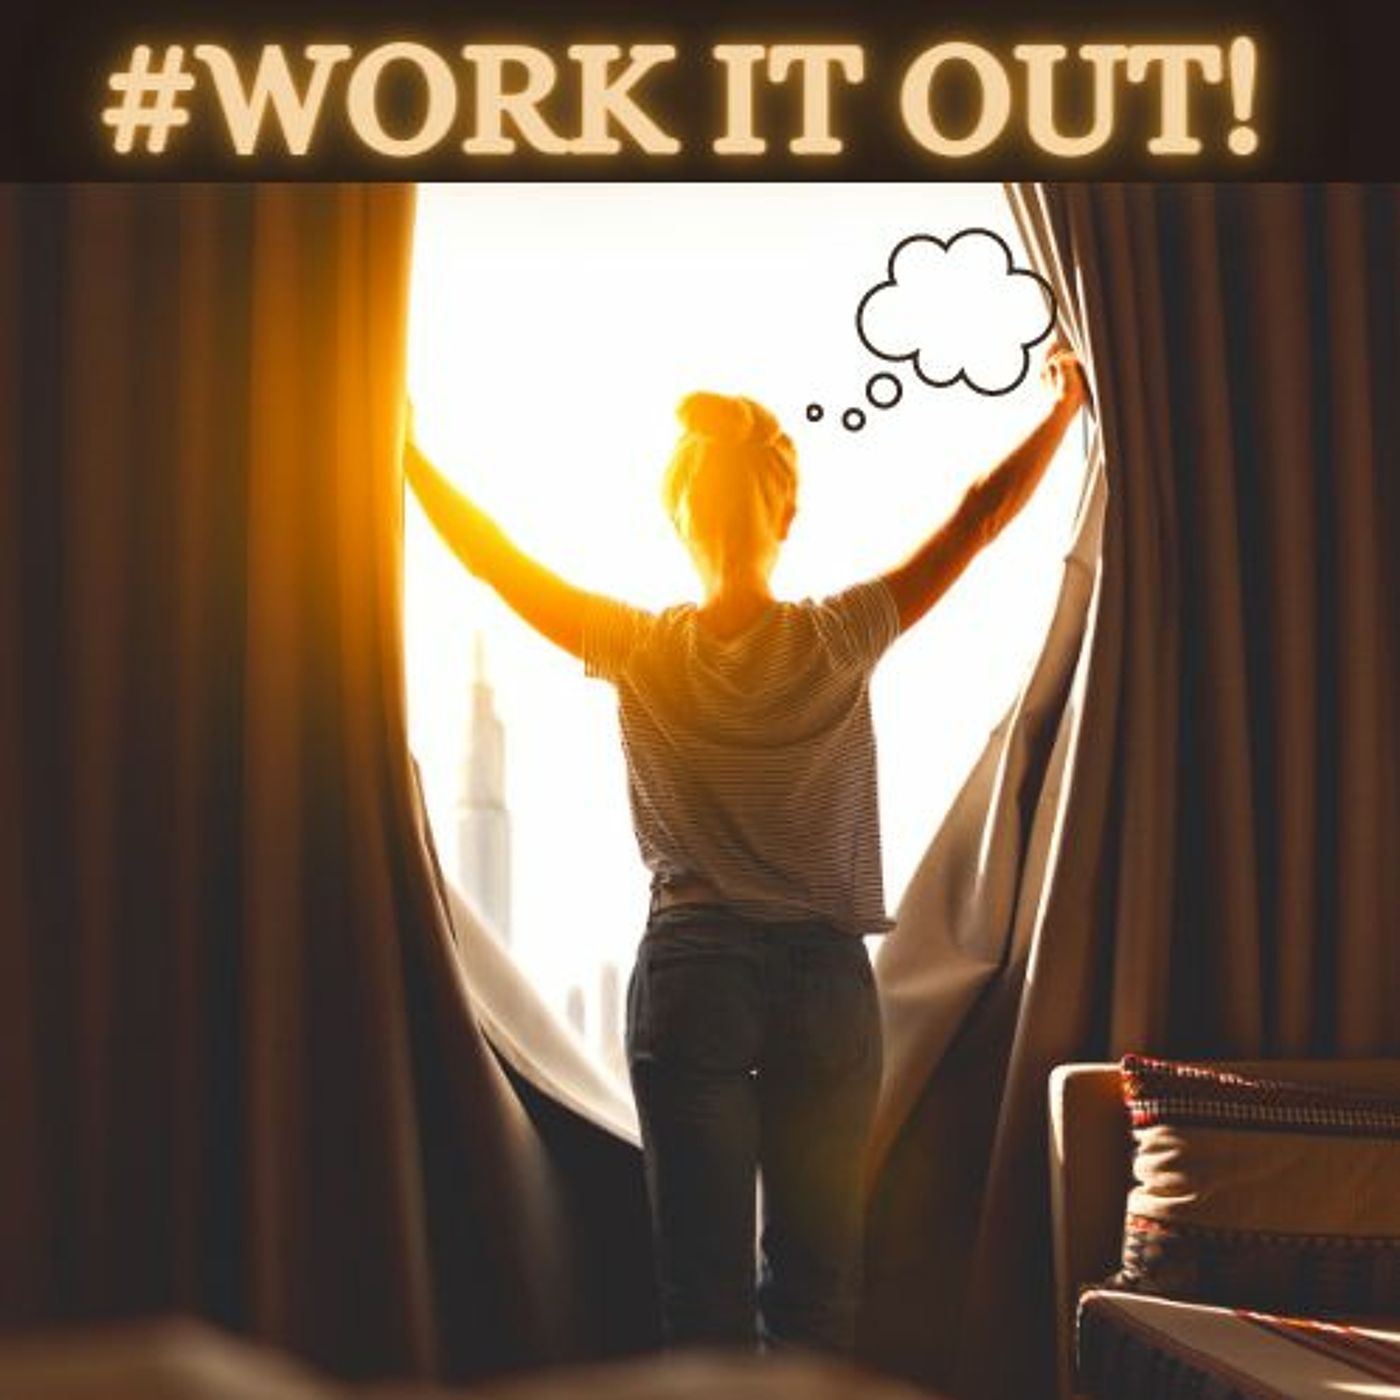 #WORK IT OUT!